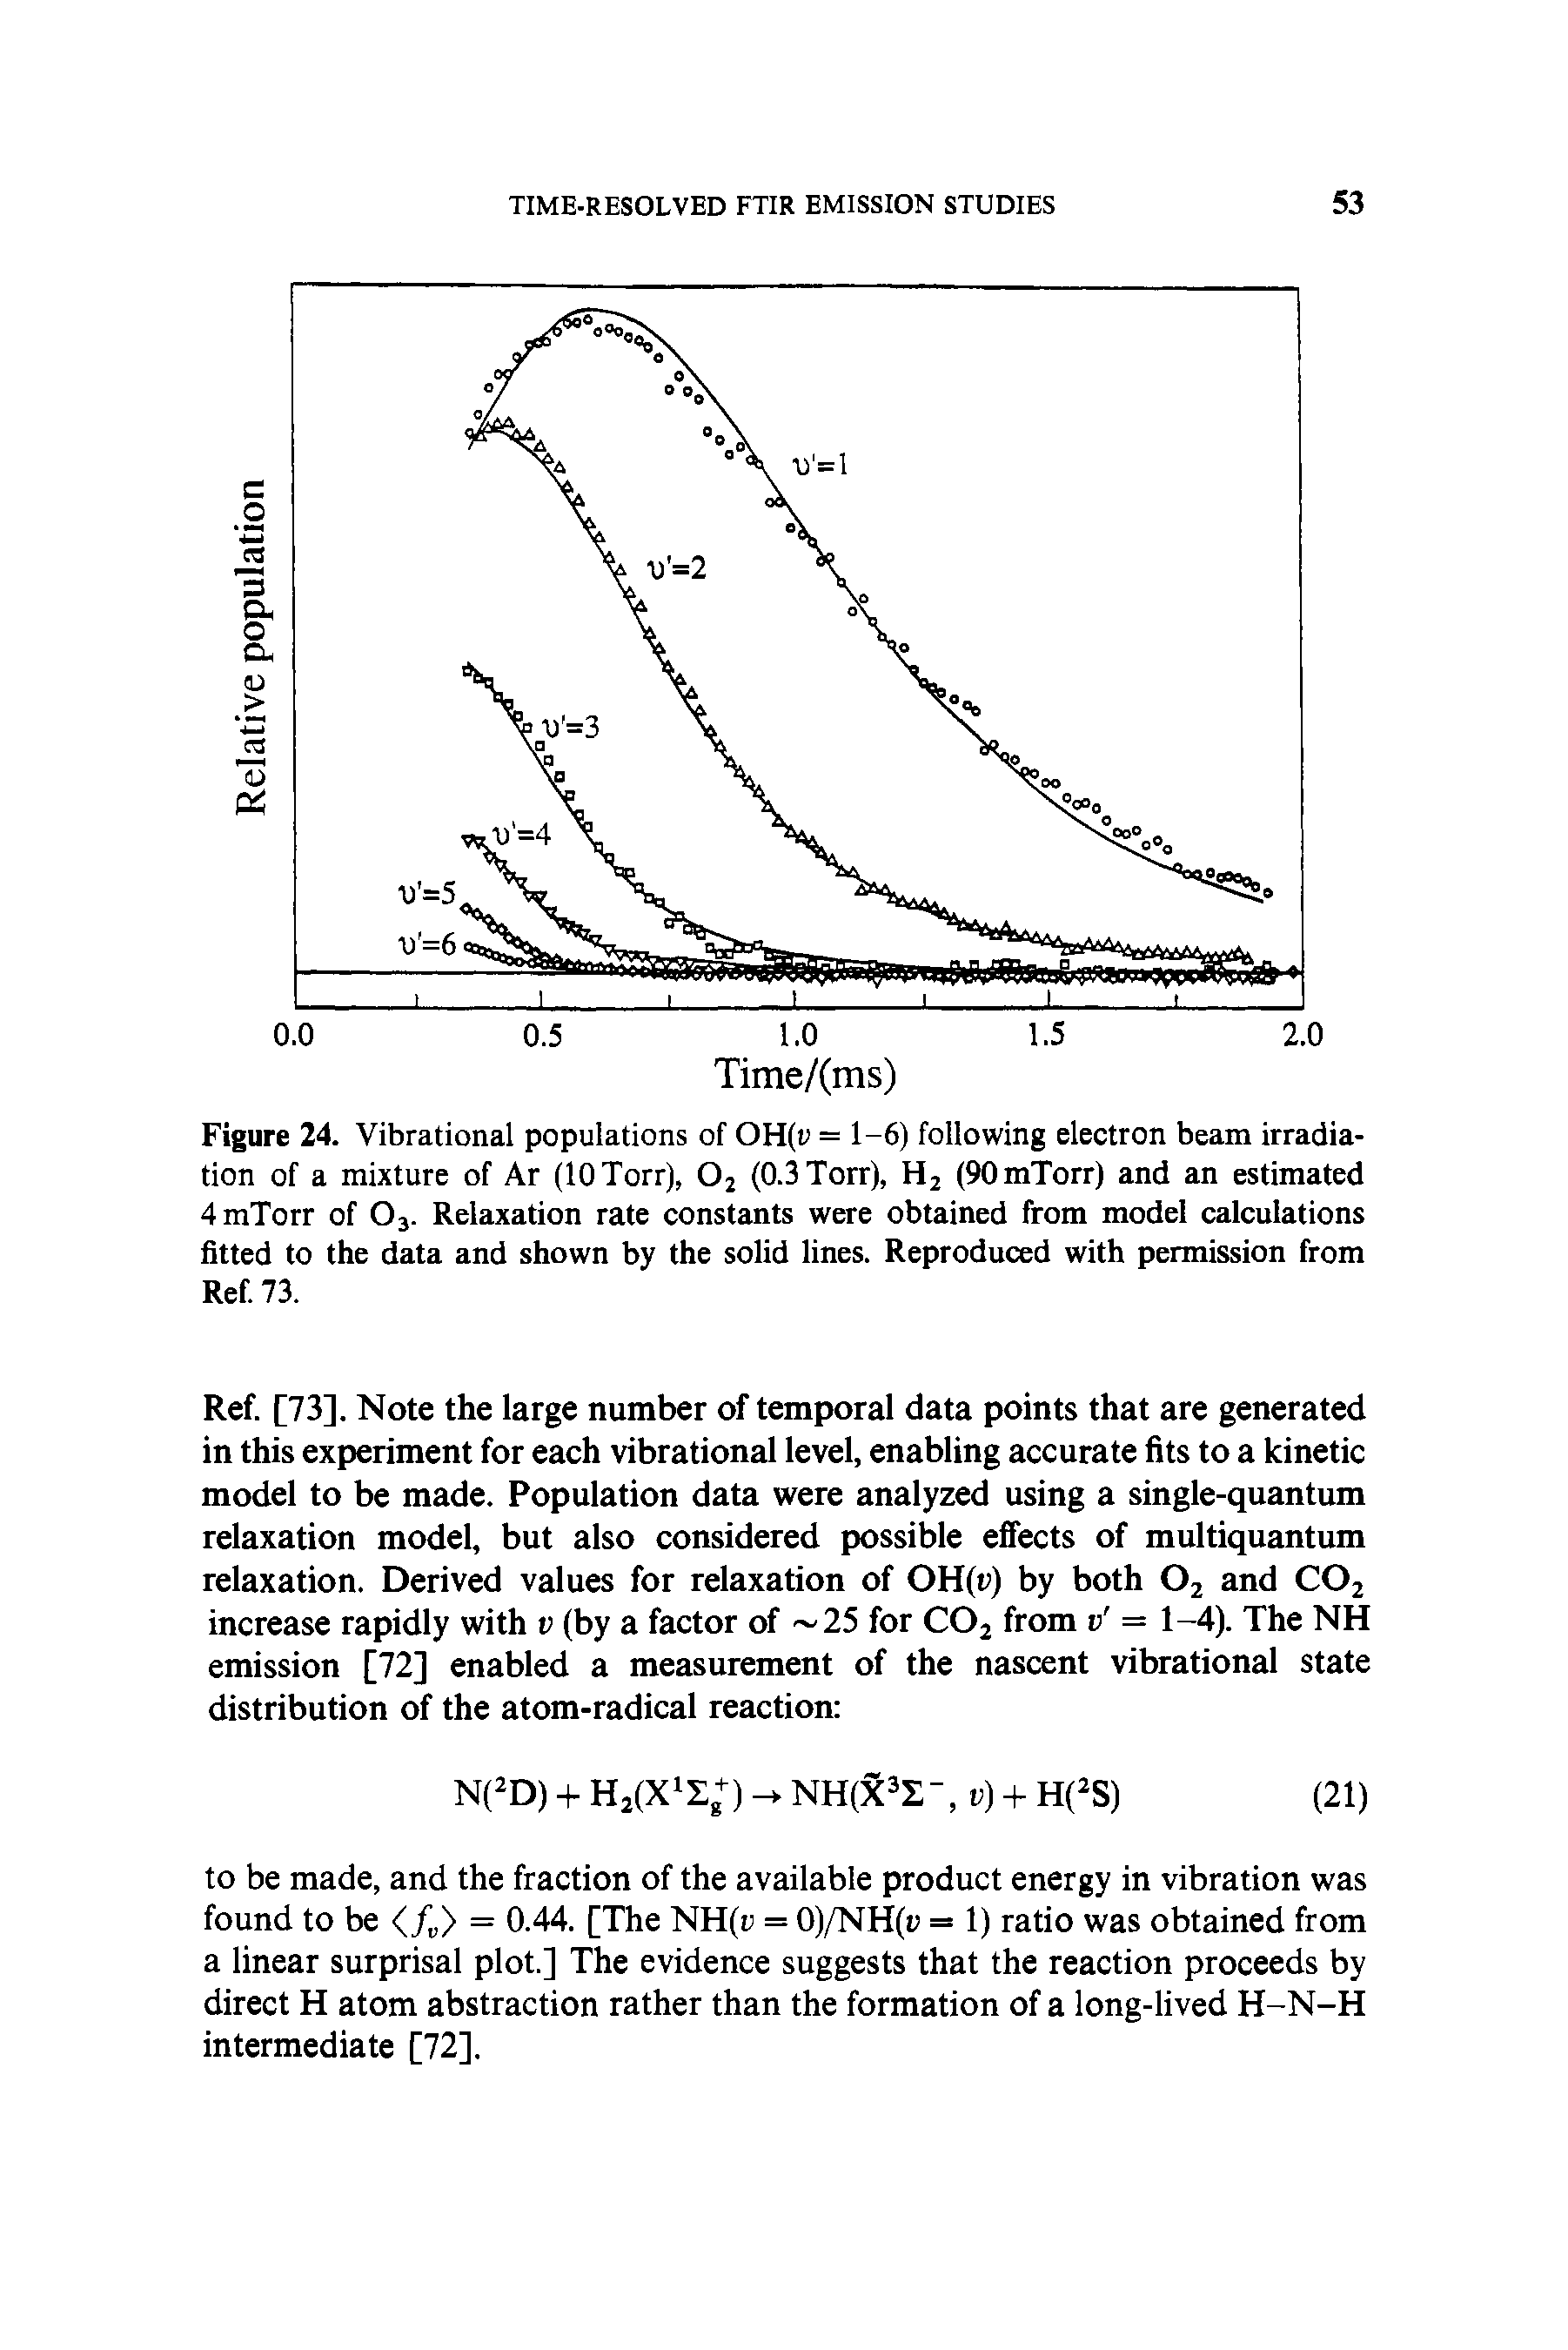 Figure 24. Vibrational populations of OH( = 1-6) following electron beam irradiation of a mixture of Ar (lOTorr), 02 (0.3Torr), H2 (90mTorr) and an estimated 4mTorr of 03. Relaxation rate constants were obtained from model calculations fitted to the data and shown by the solid lines. Reproduced with permission from Ref. 73.